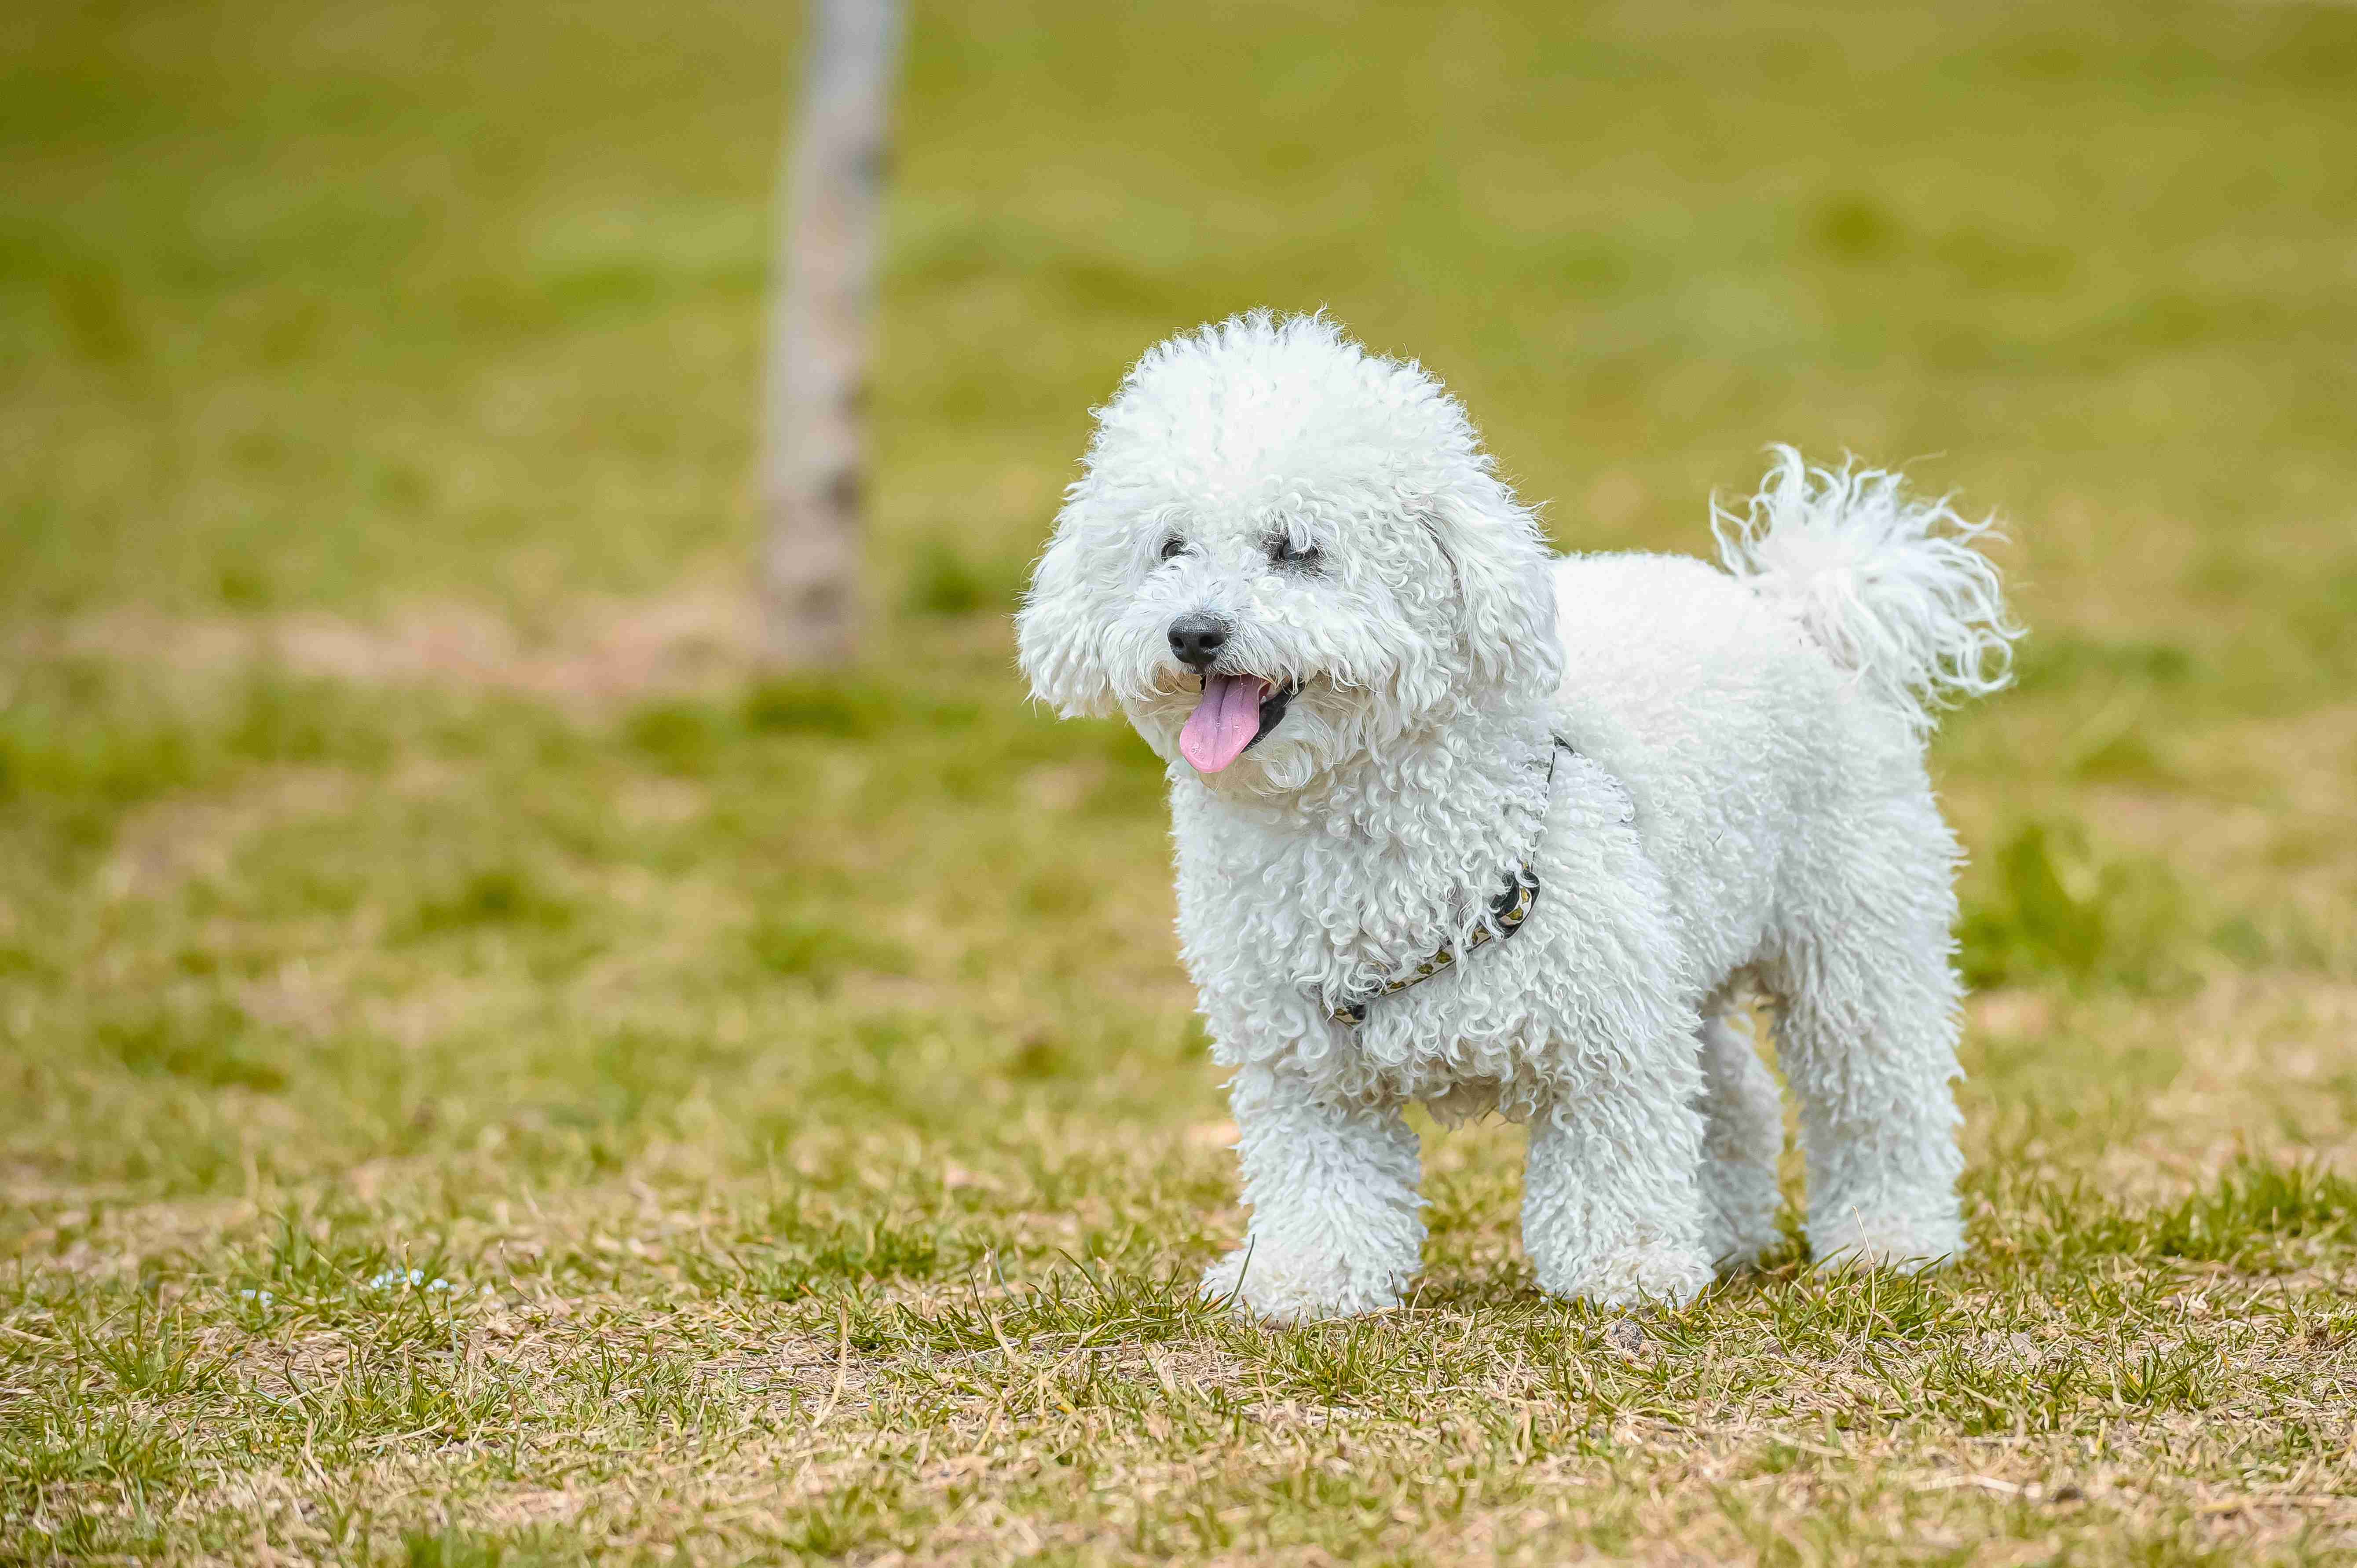 Did you have any concerns about your Poodle puppy's interaction with children at the park or in public spaces?